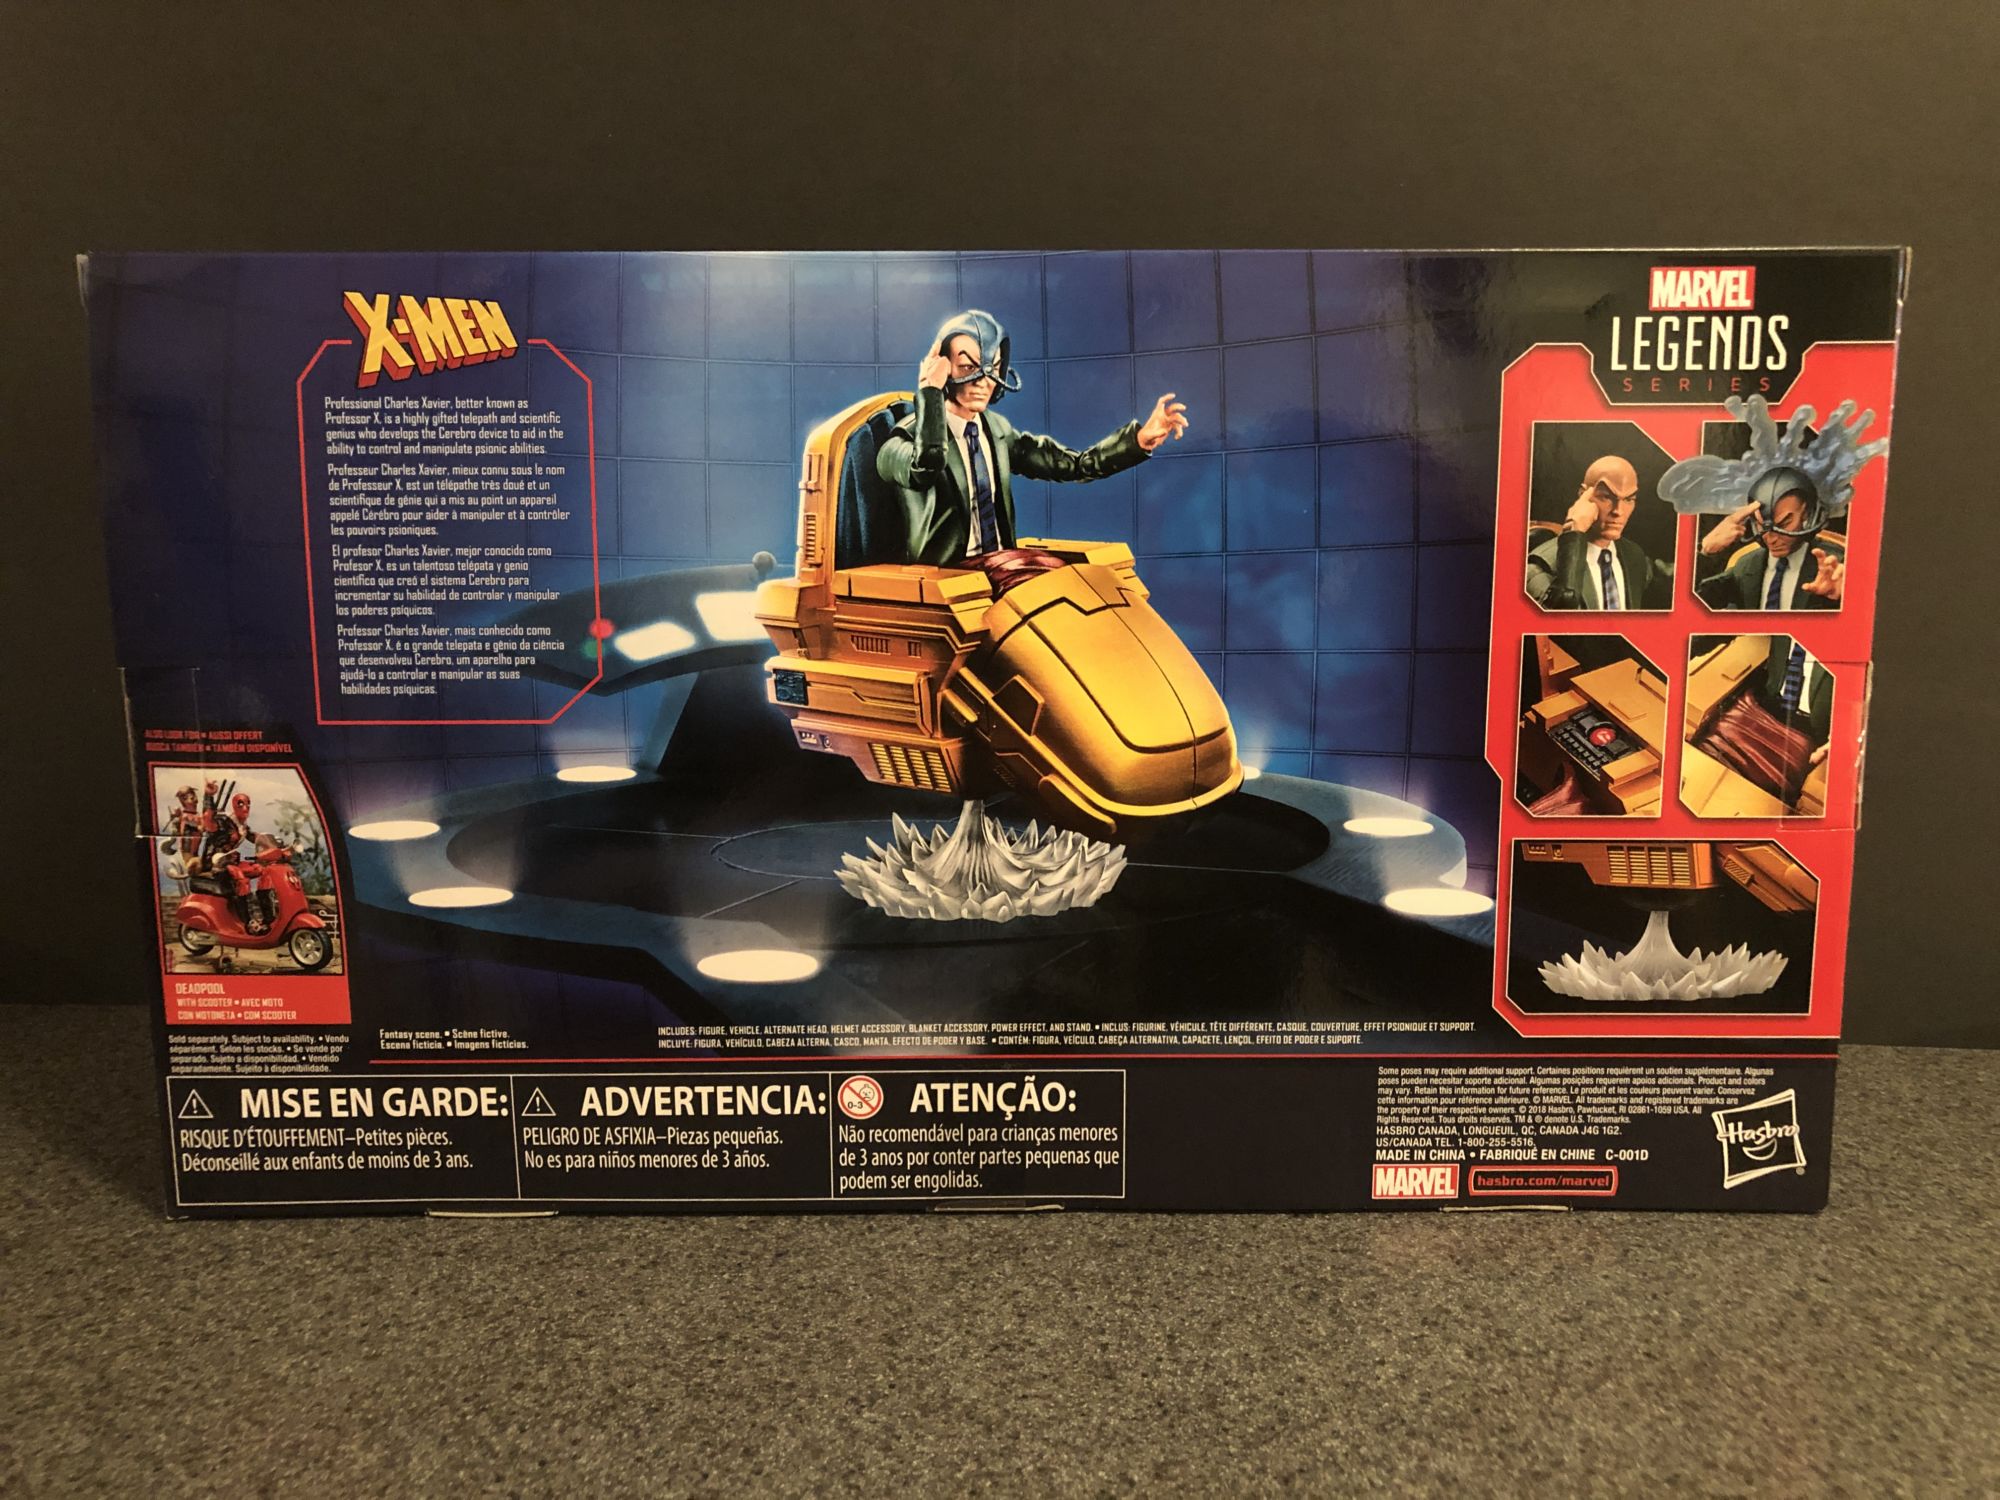 Let's Take a Look at the New Marvel Legends Professor X Figure